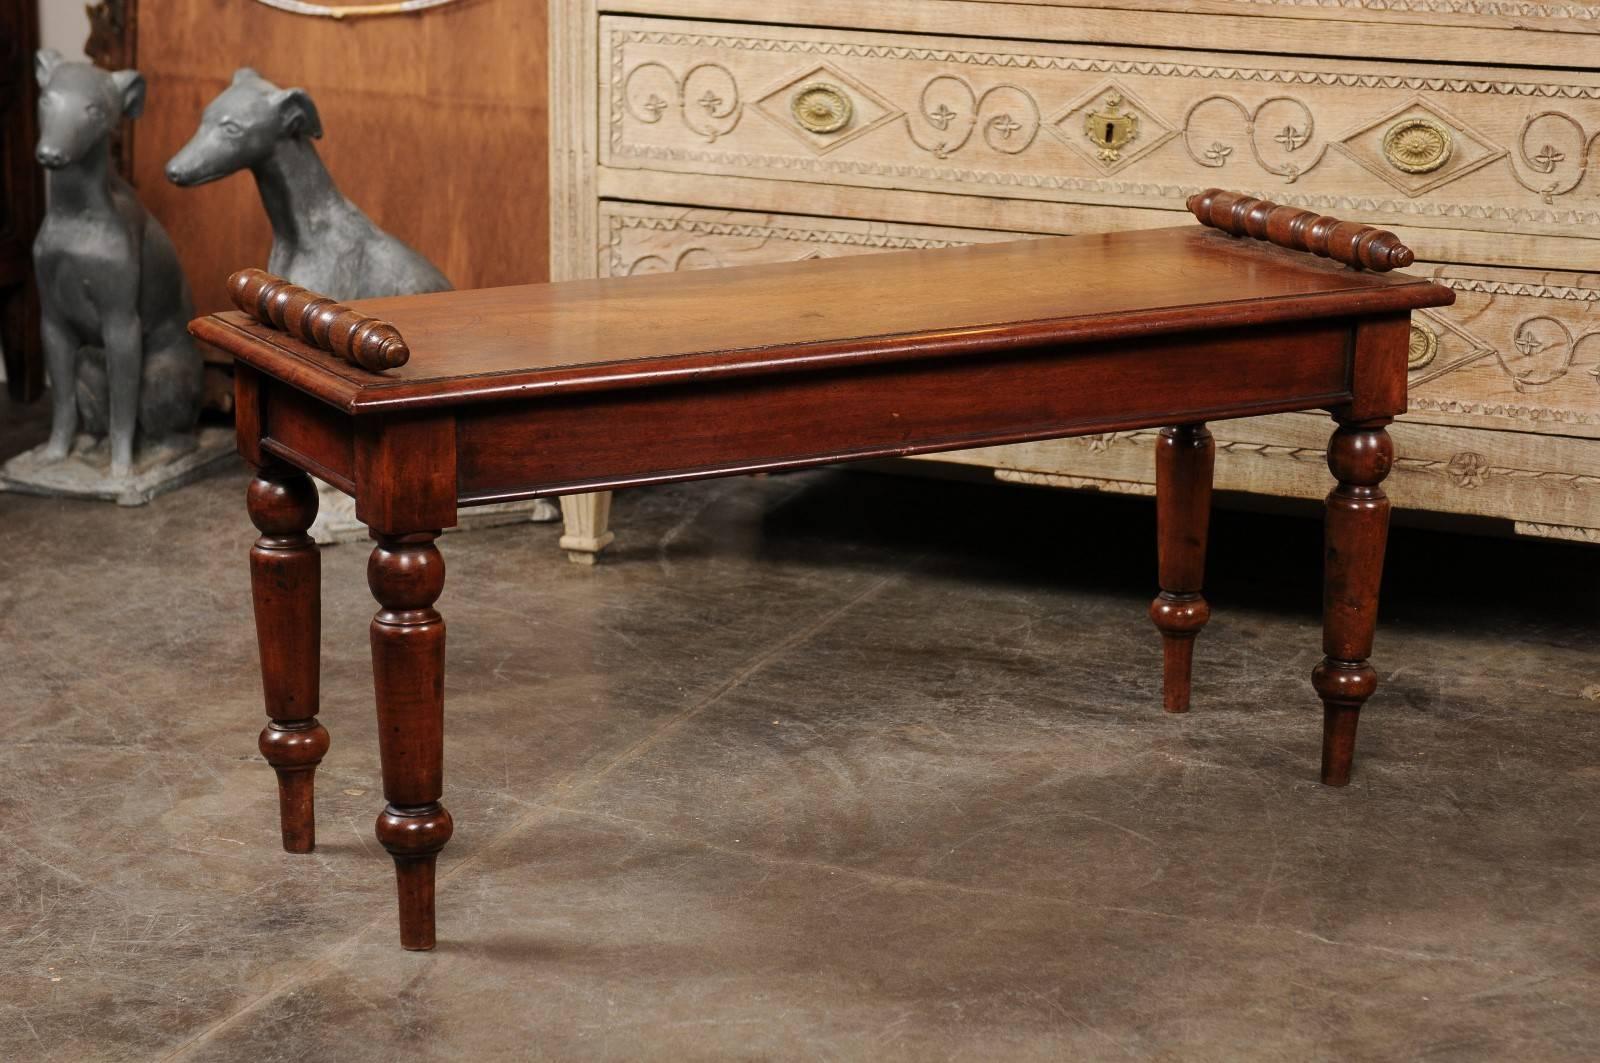 This English mahogany hall bench from the late 19th century features a rectangular wooden seat with beveled edges adorned with two exquisite turned arm supports. The piece is raised on four elegant turned legs with tall cylindrical feet. This bench